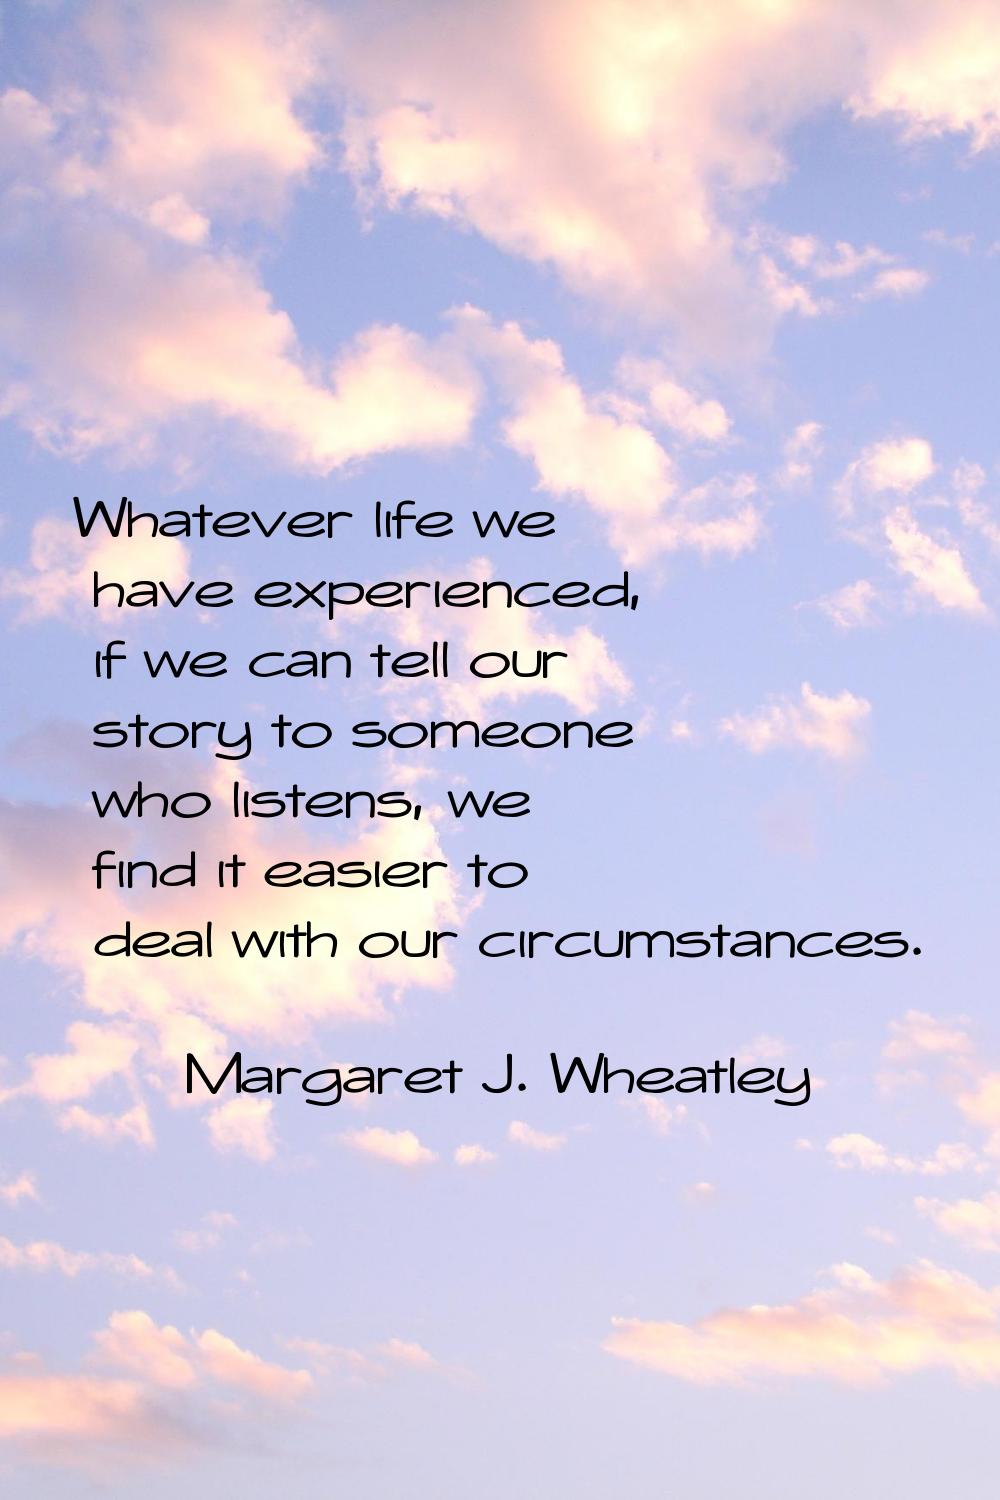 Whatever life we have experienced, if we can tell our story to someone who listens, we find it easi